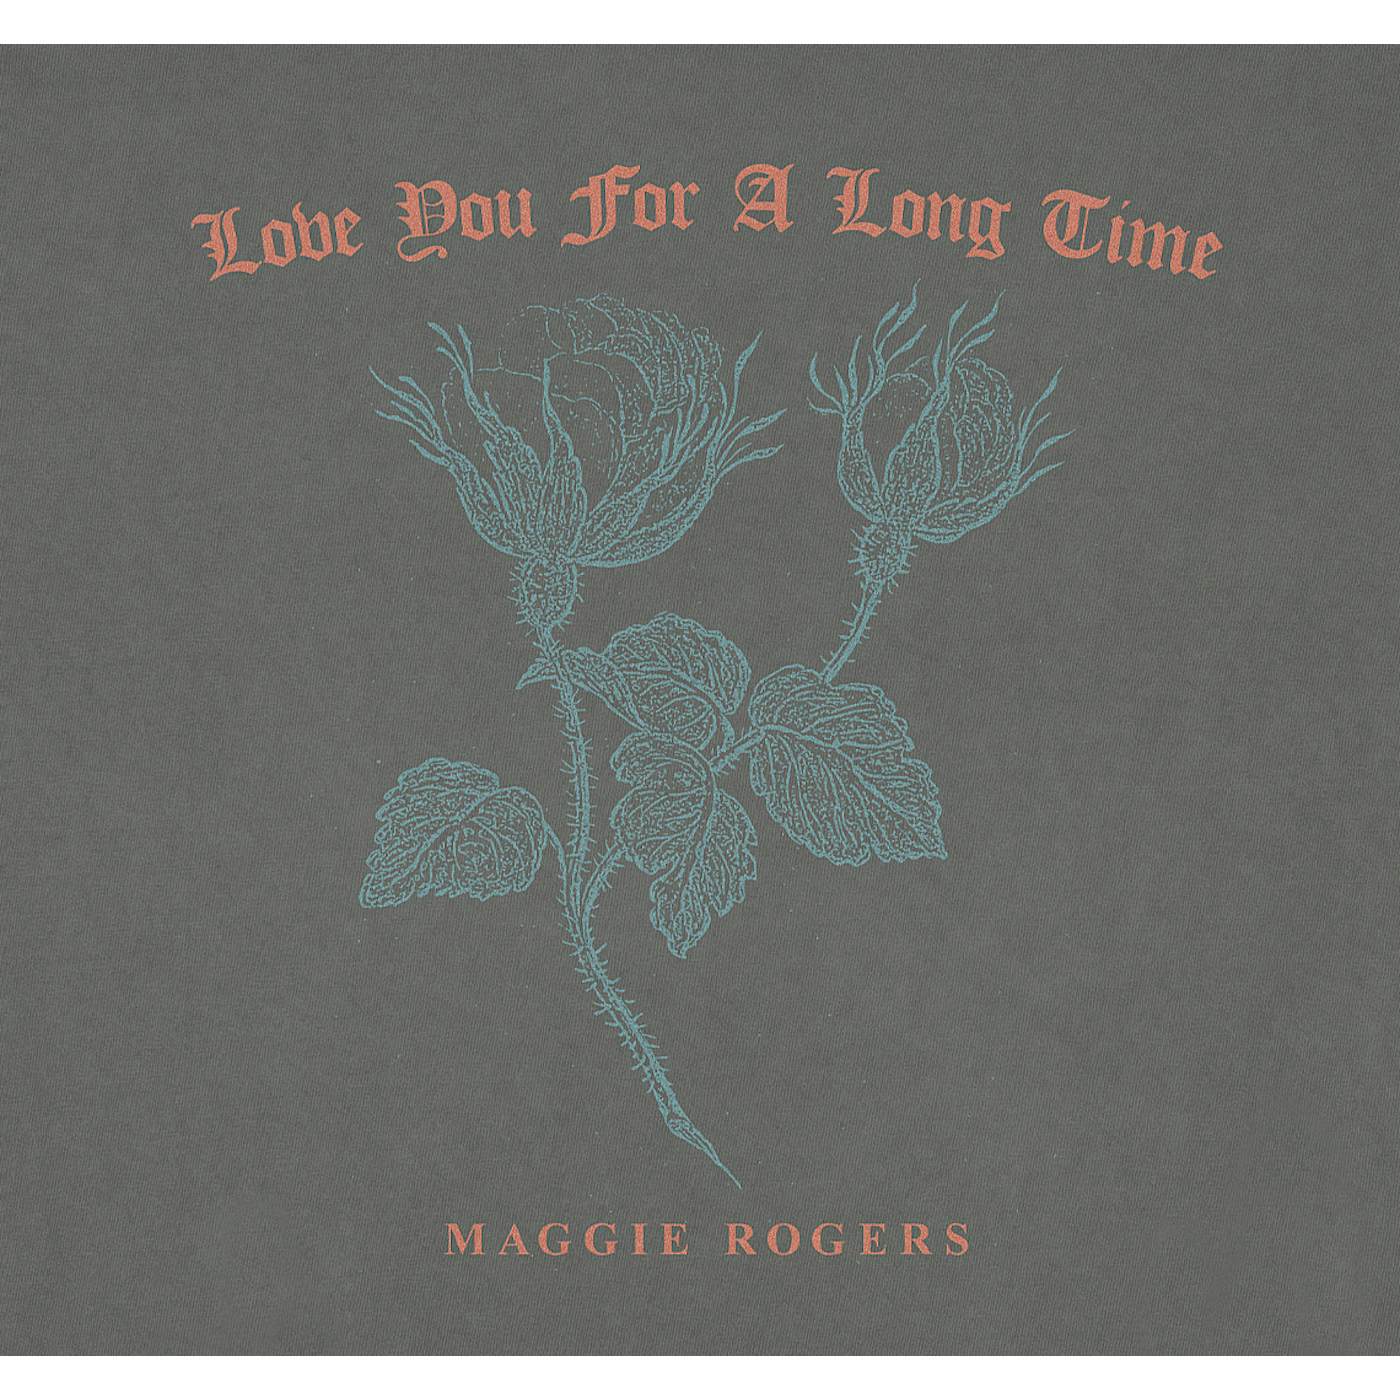 Maggie Rogers LY4ALT Rose T-Shirt